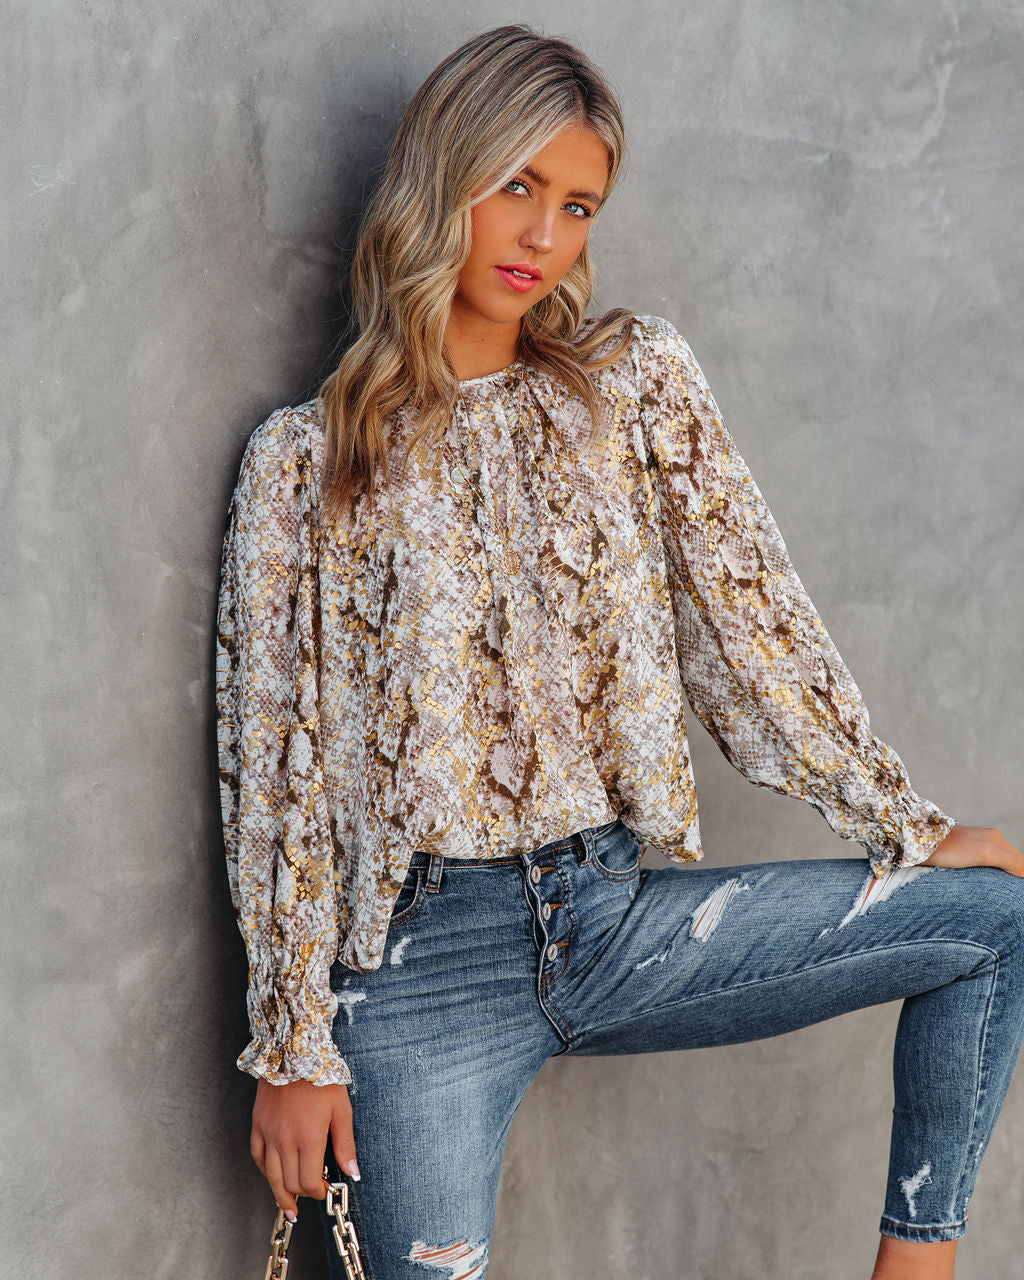 The Golden Days Printed Blouse THML-001